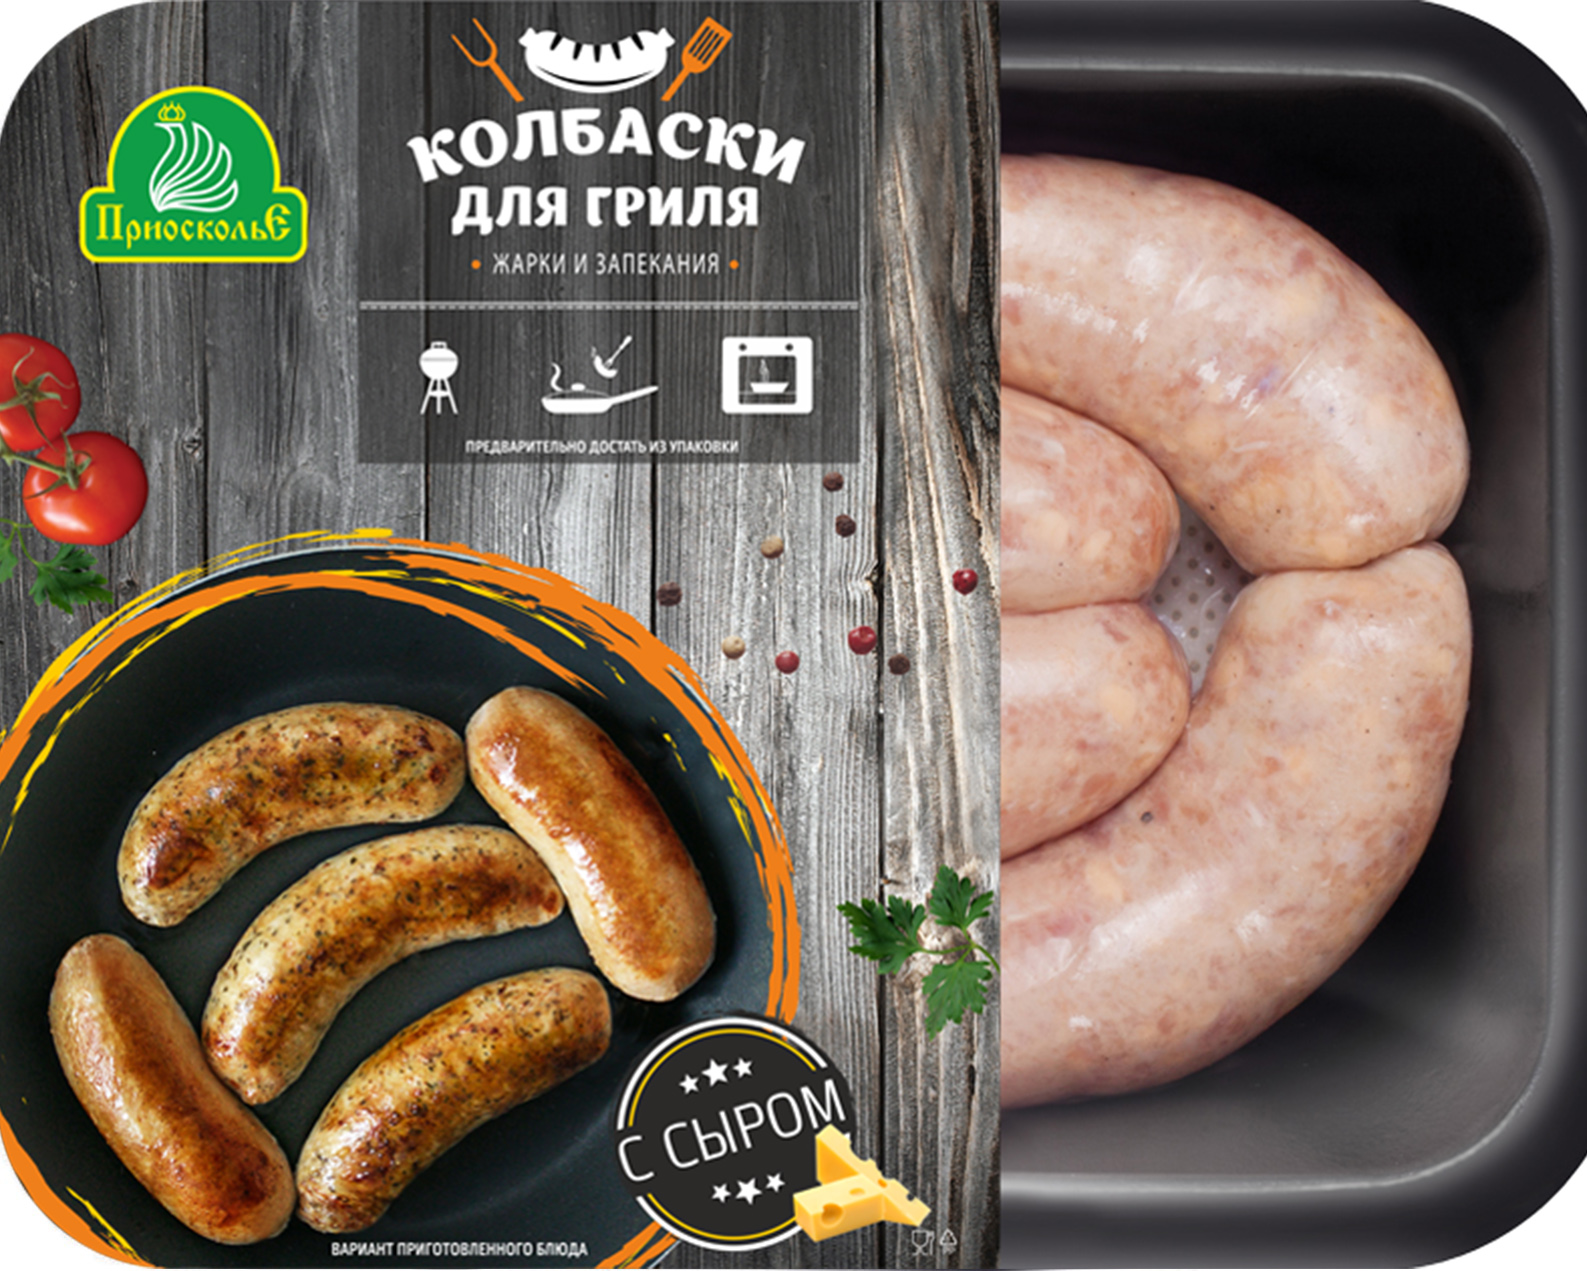 Sausages for grilling "S  syrom"